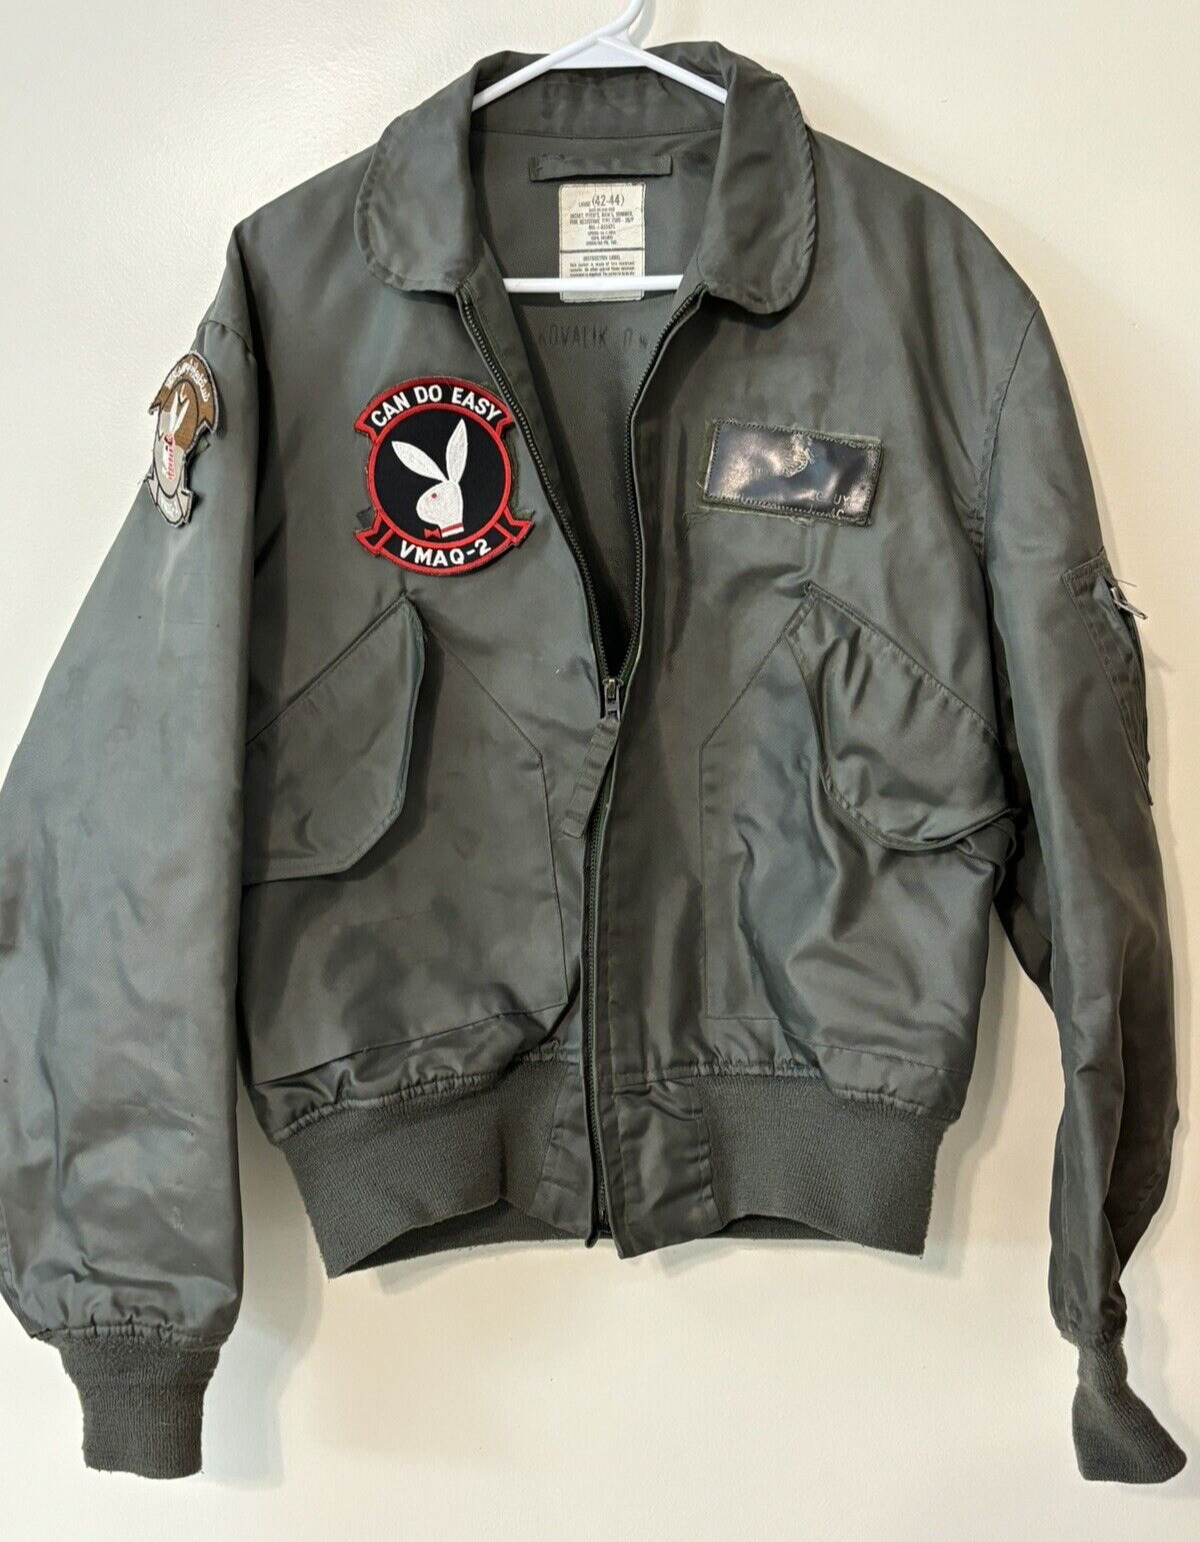 US Military Flyers Jacket With Patches MIL-J-83382C Size 42-44